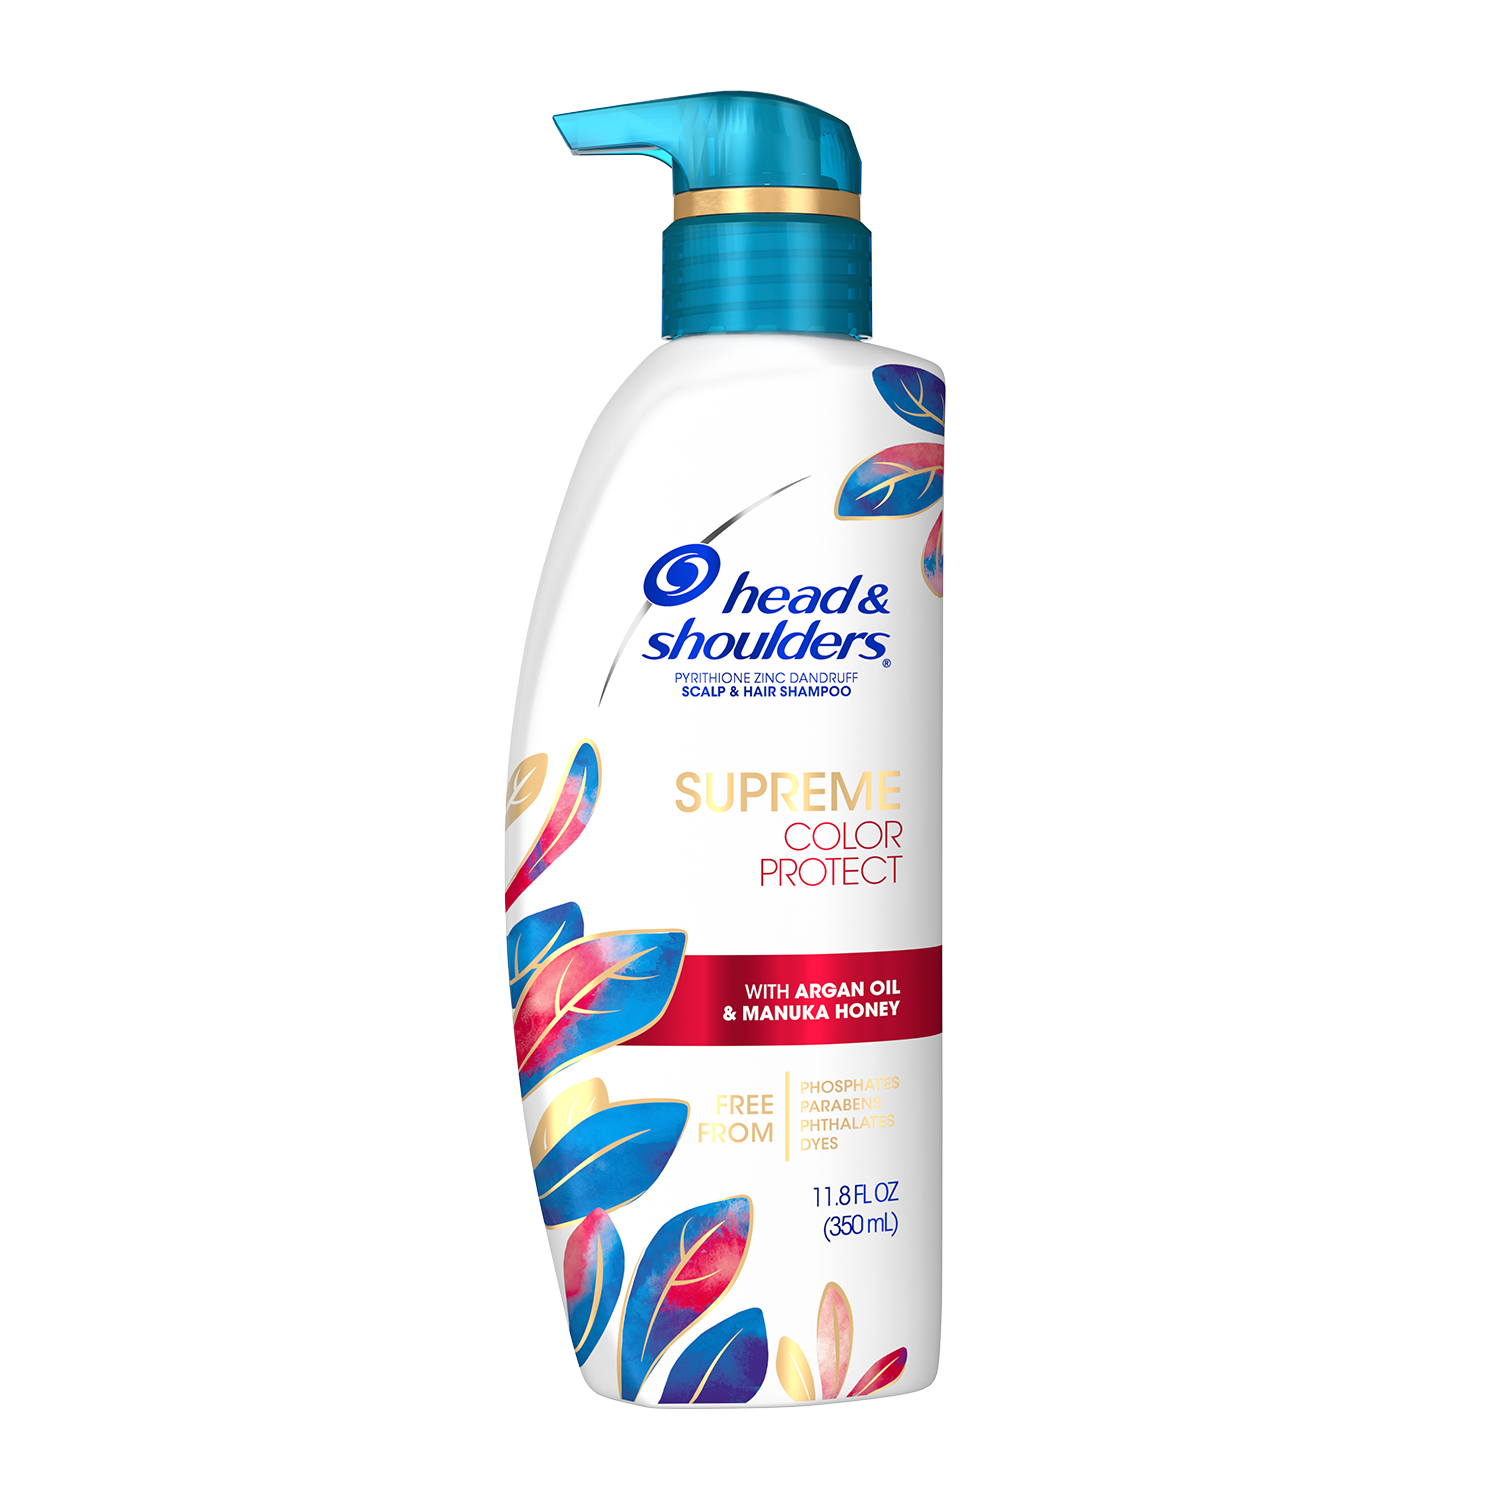 Head & Shoulders Supreme Moisturizing Color Protect Dandruff Relief Daily Shampoo with Honey, 11.8 fl oz - image 1 of 14